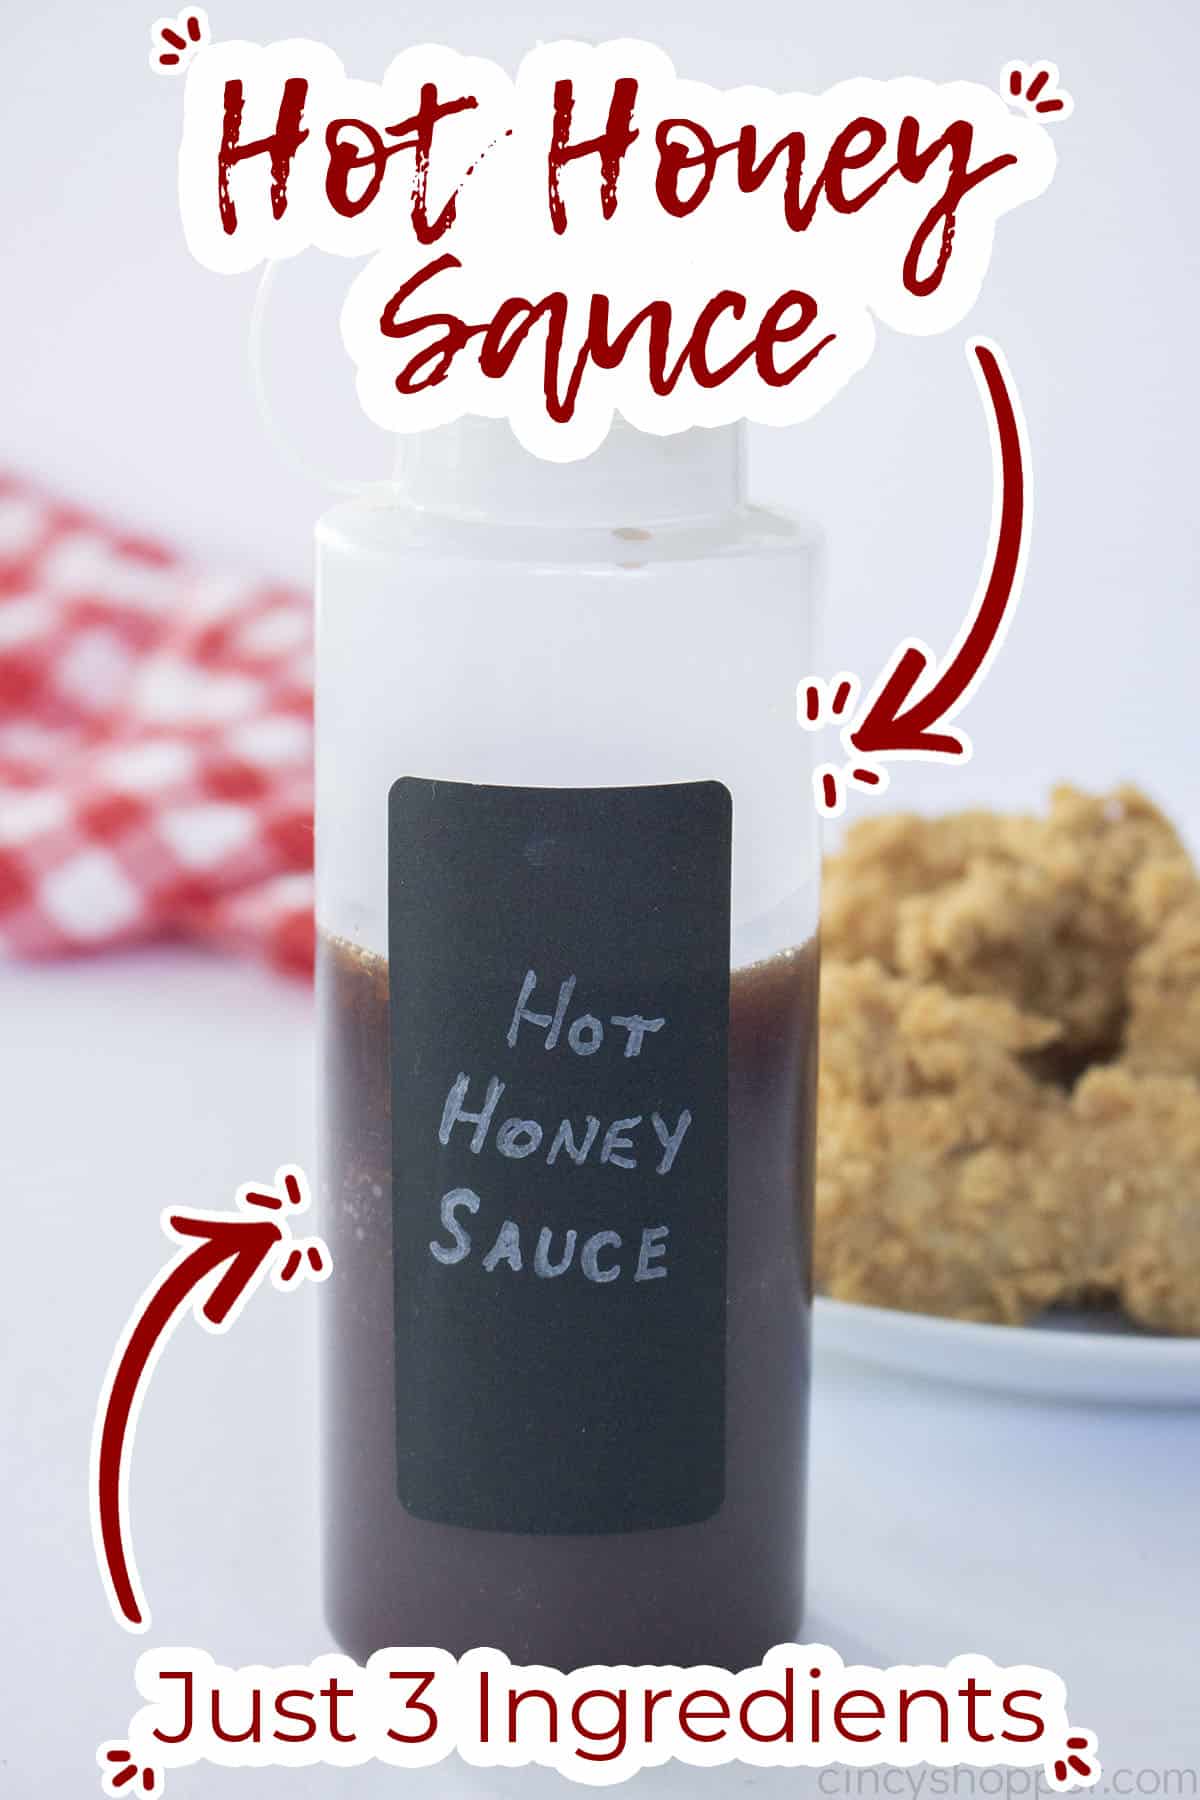 Jar with text on image Hot Honey Sauce just 3 Ingredients.